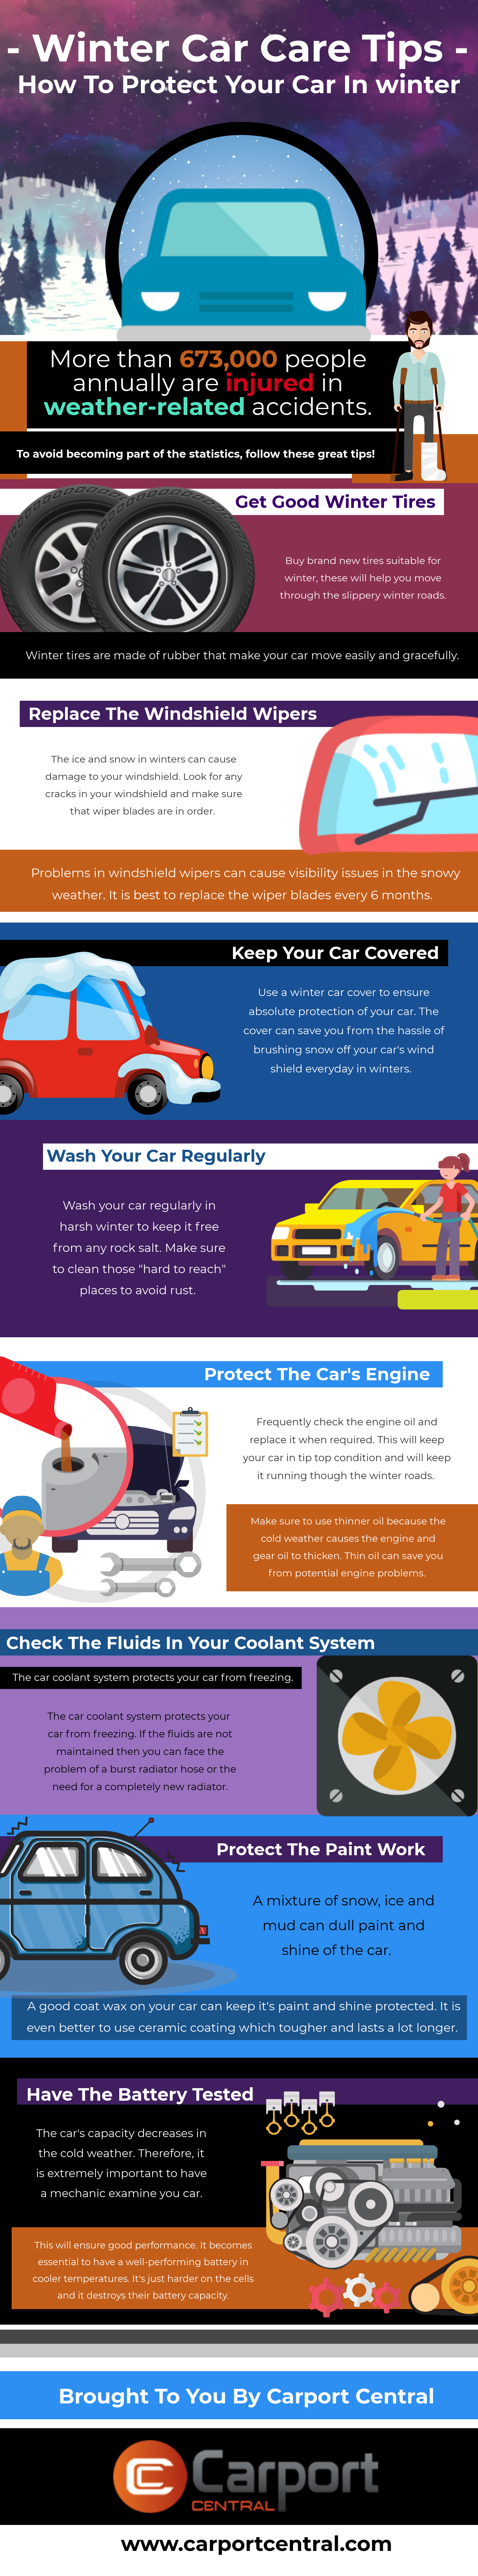 Winter Car Care Tips: How to Protect Your Car in Winter